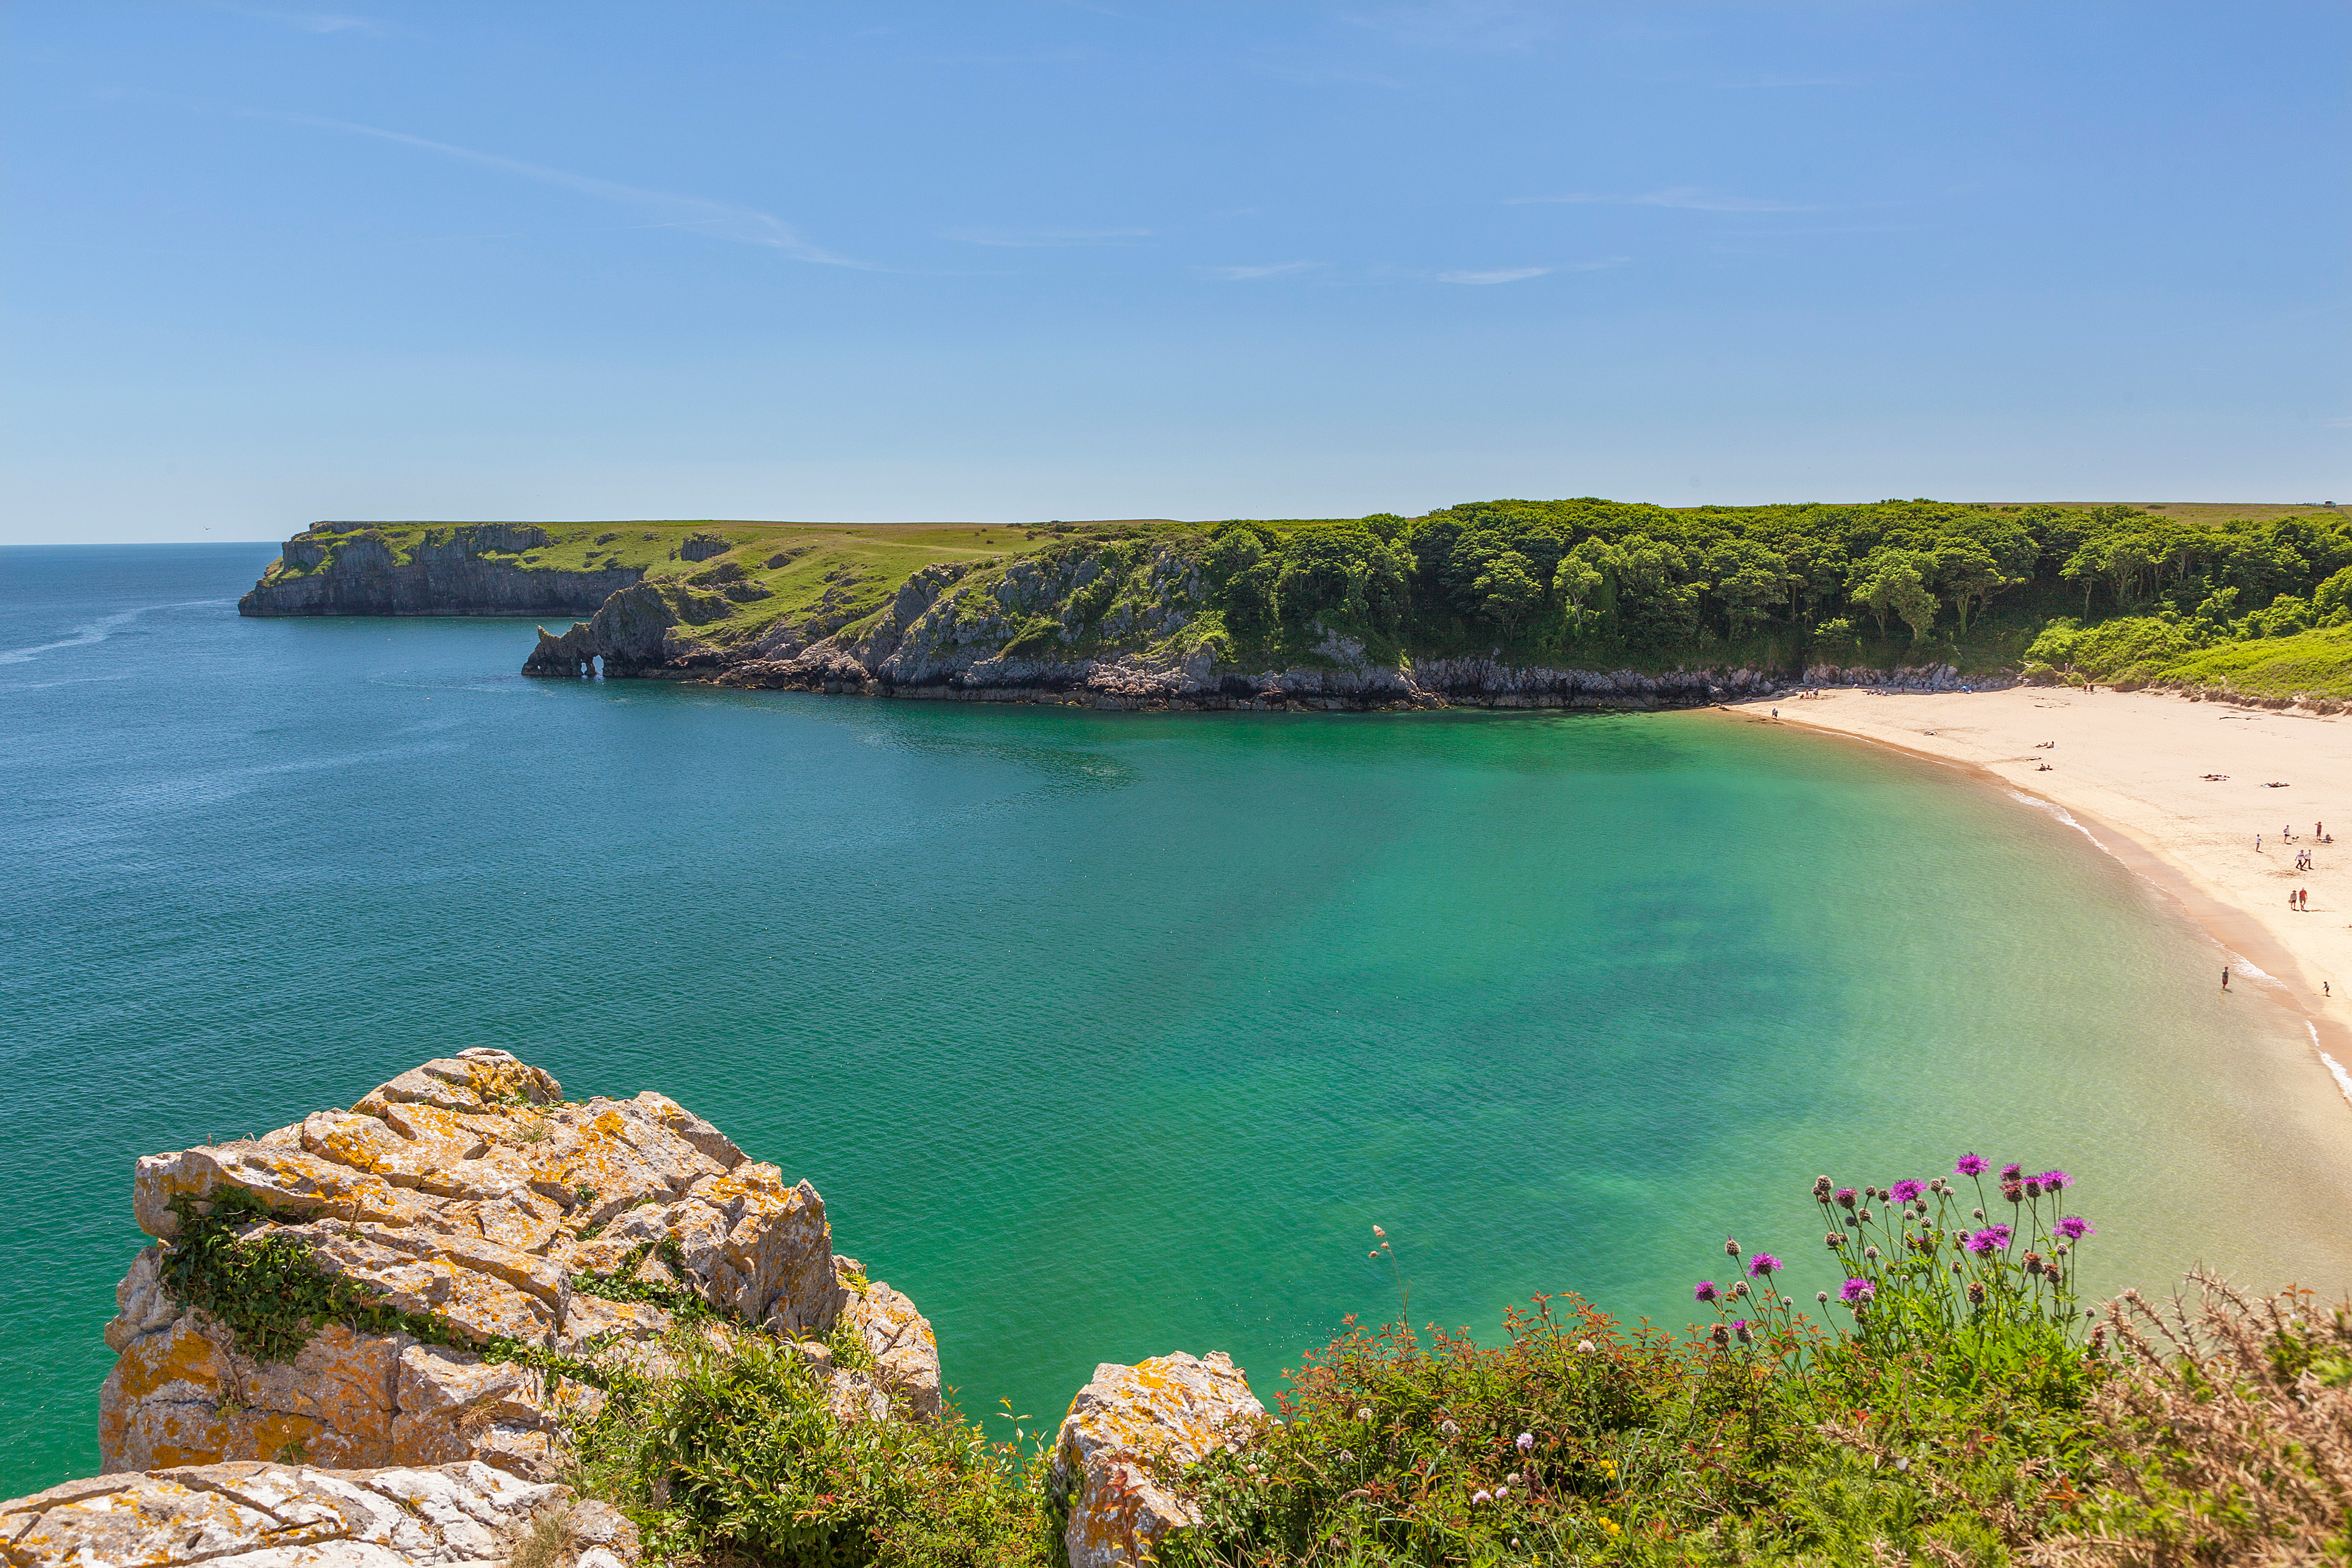 Highlights of the Pembrokeshire Coast